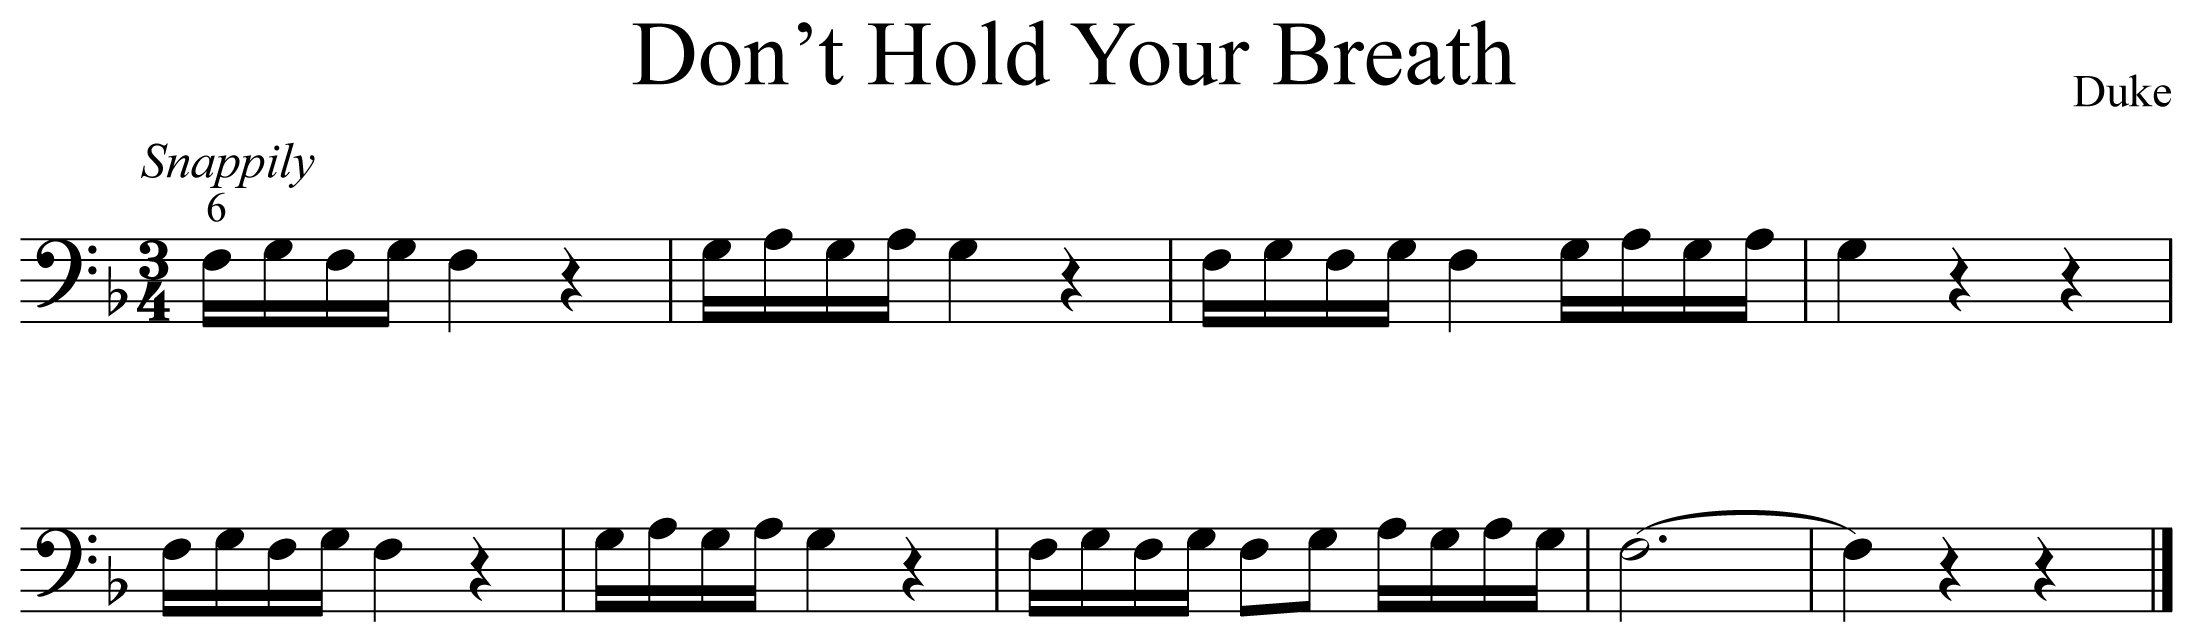 Don't Hold Your Breath Music Notation Trombone